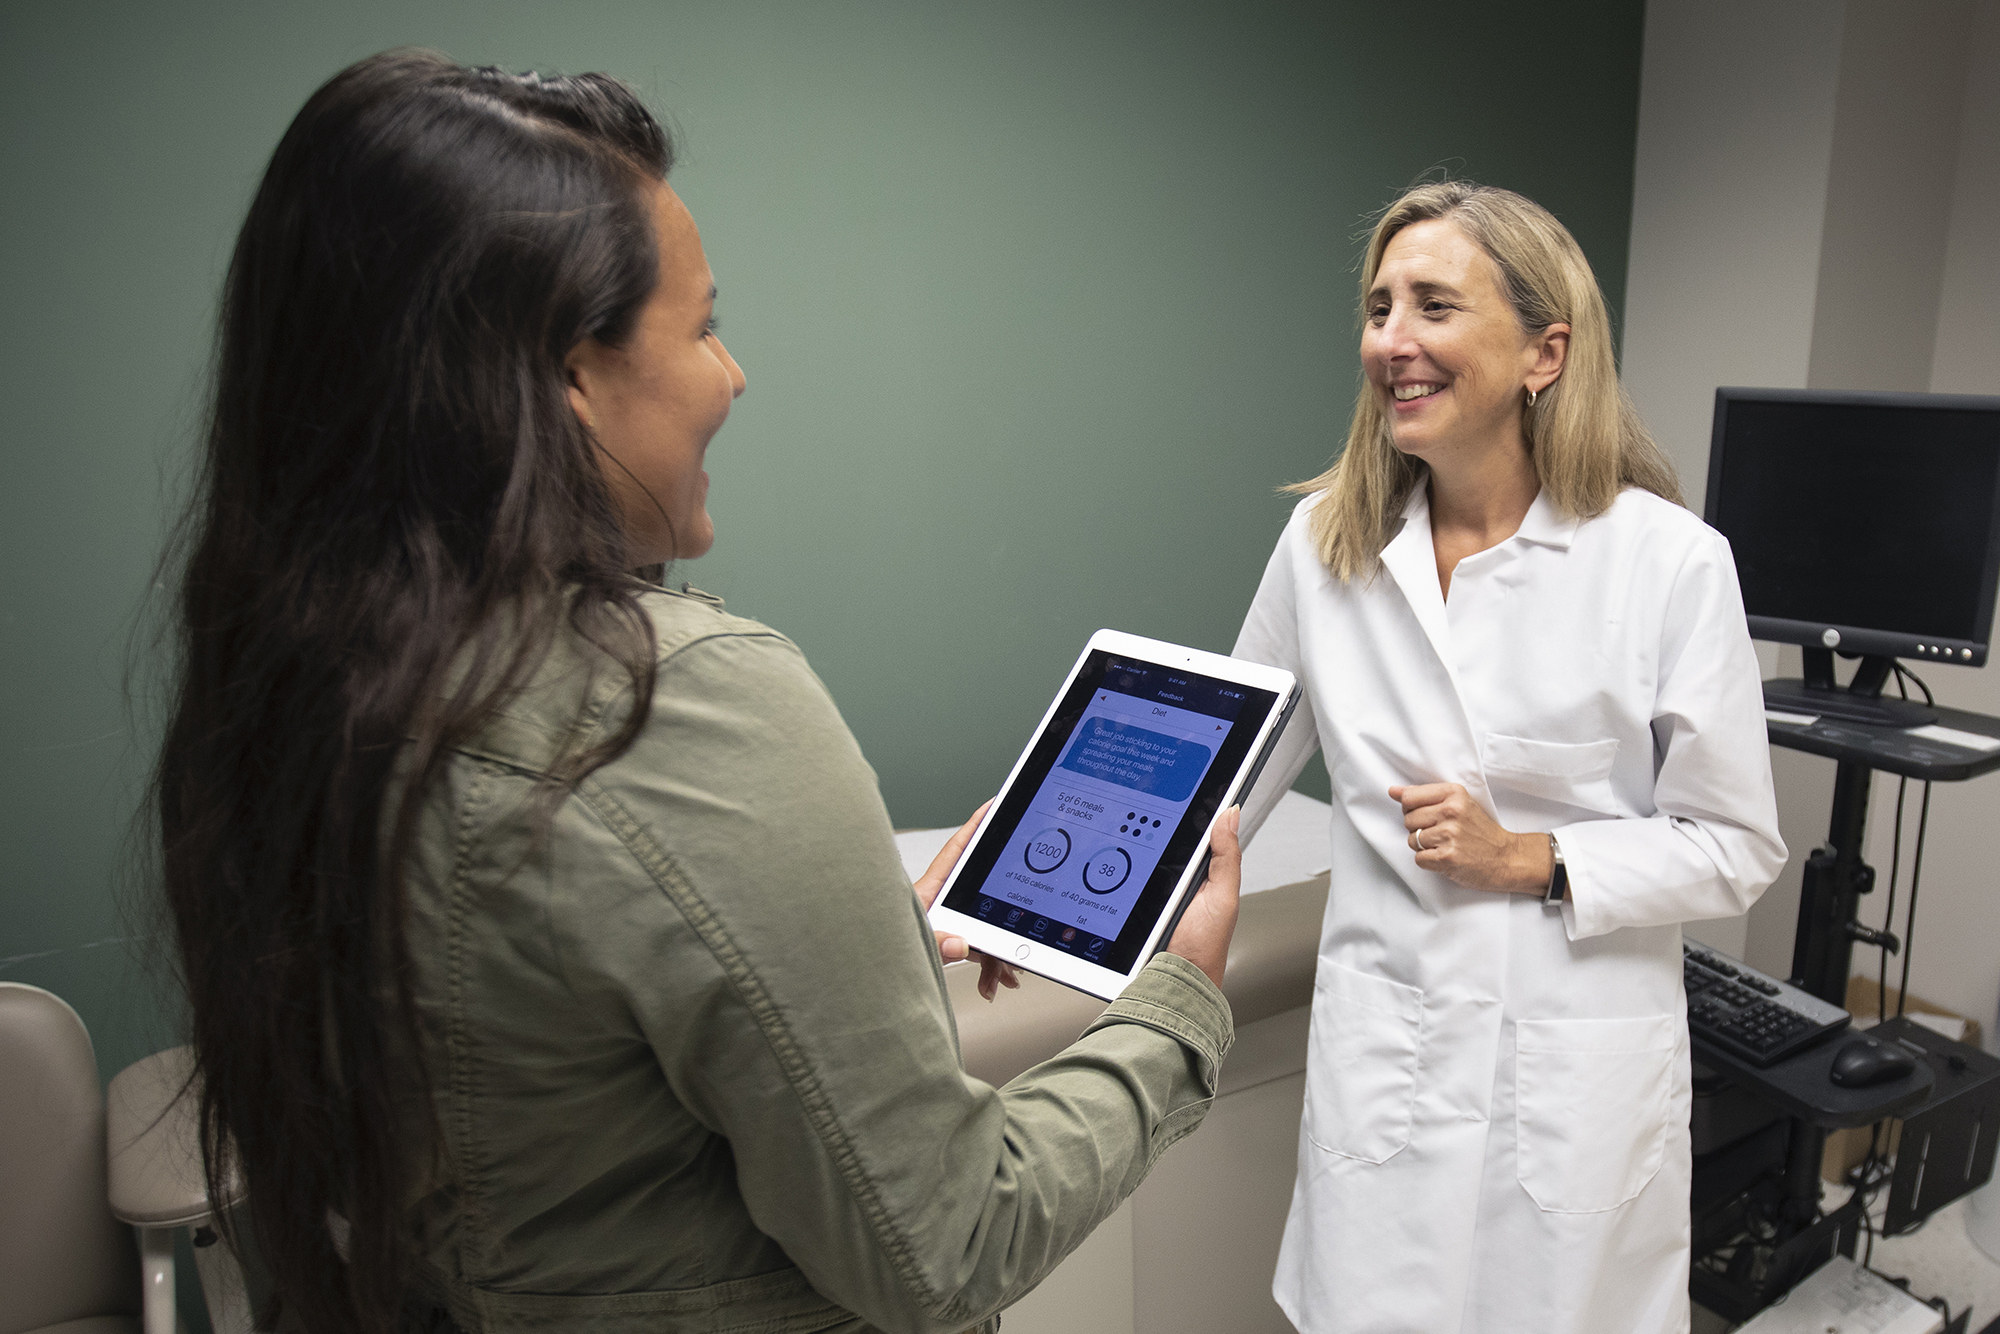 Deb Tate (right) speaks with a young woman holding an iPad with the mPWR app on it in an exam room